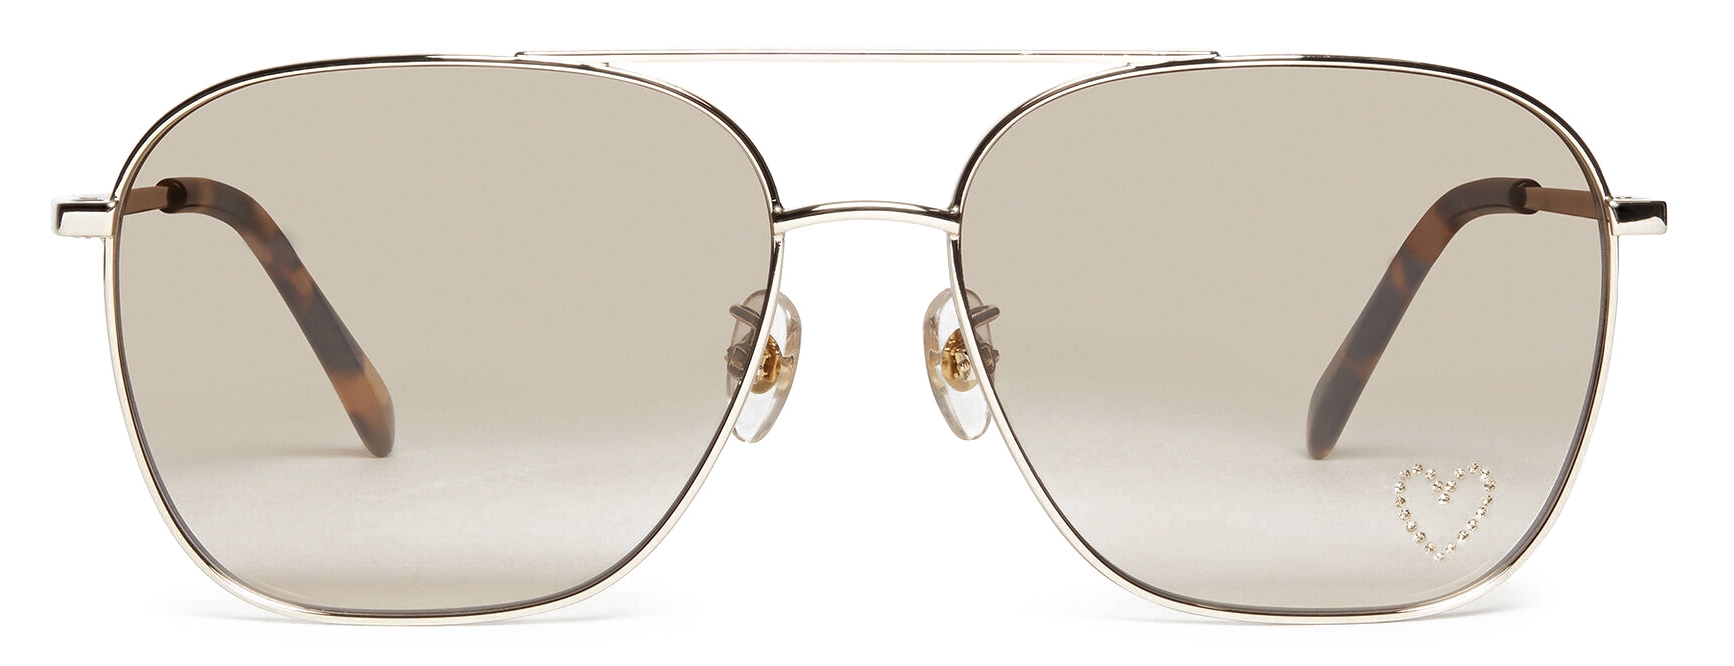 Christian Dior DiorSoStellaire1 59mm Oversized Square Injection Plastic  Sunglasses  ShopStyle